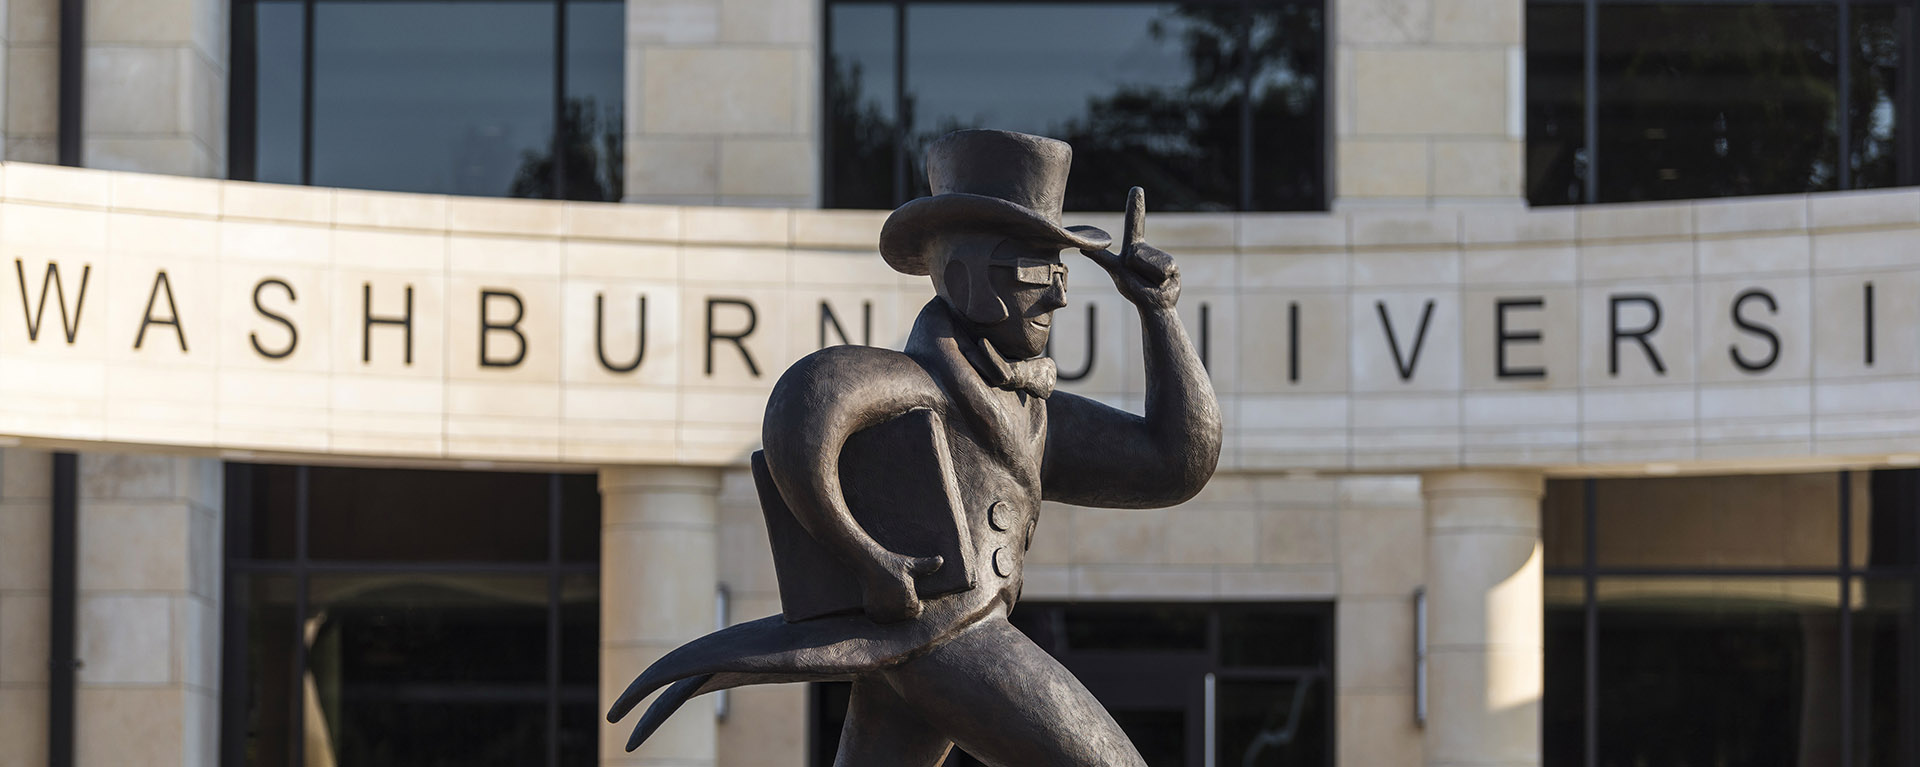 ichabod statue in front of building entrance